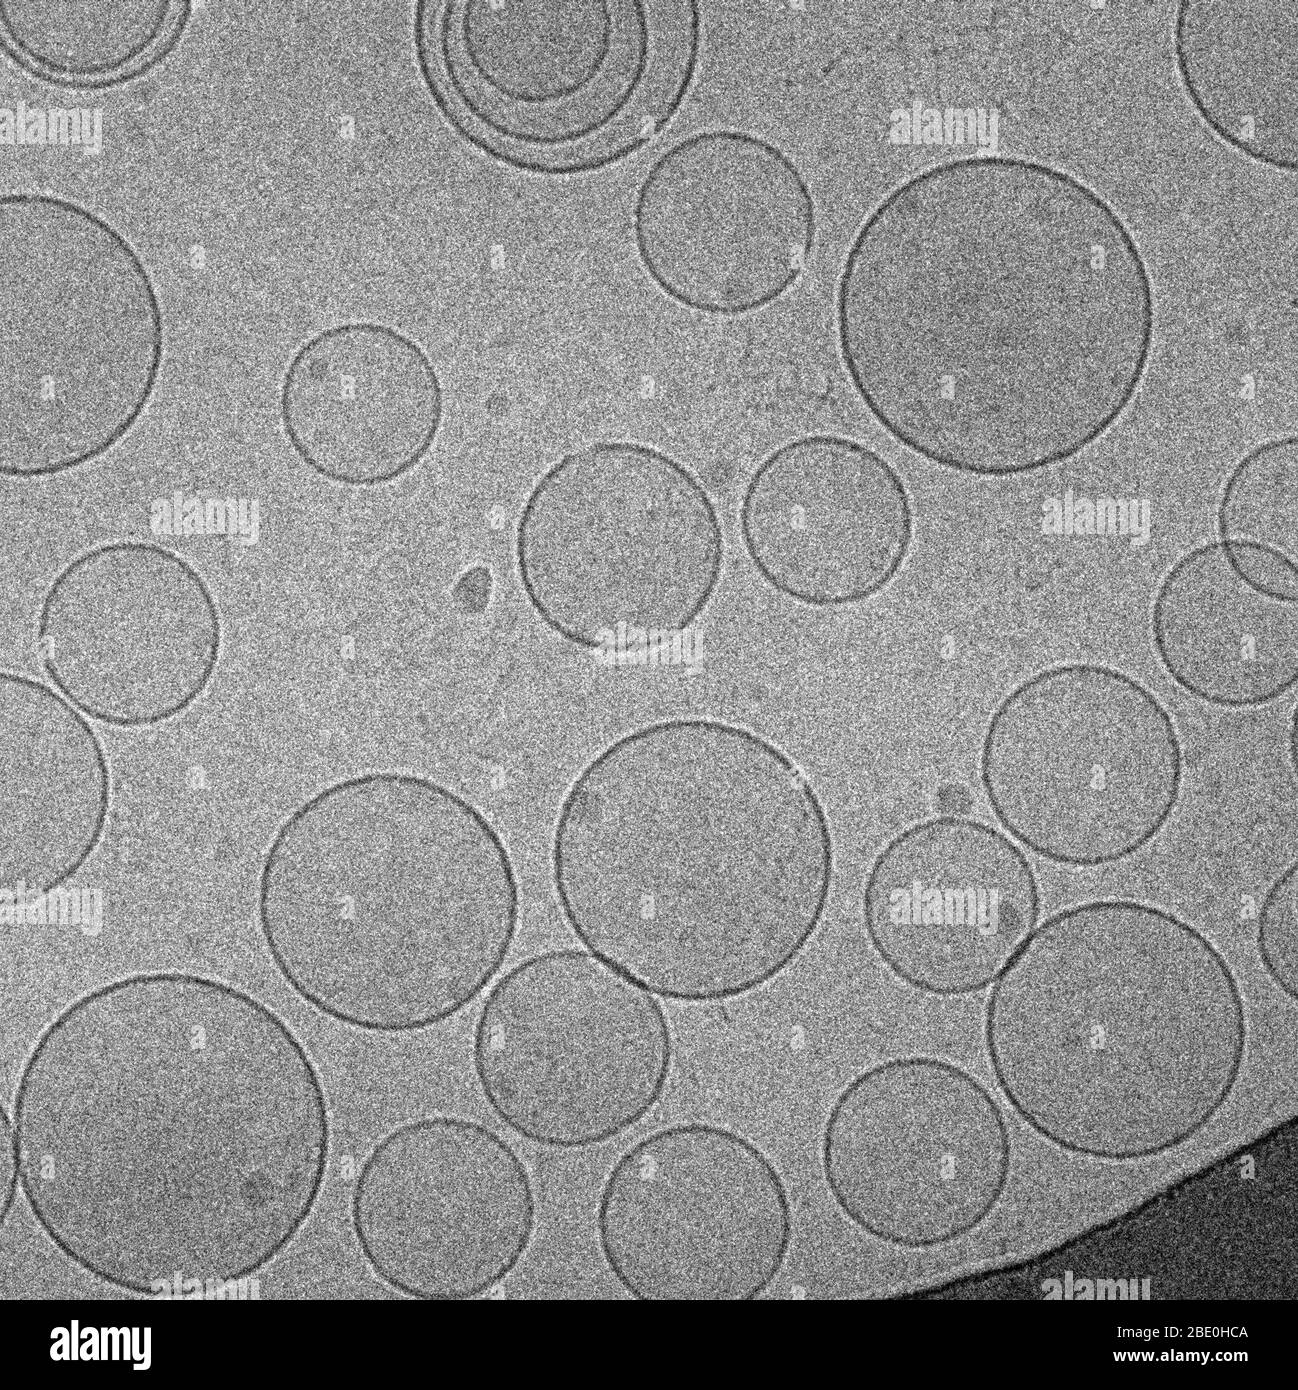 Cryo-EM image of bolalipid liposomes, artificially prepared vesicles composed of a lipid bilayer. They can be used as vehicles for administration of nutrients or pharmaceuticals. Magnification unknown. Stock Photo